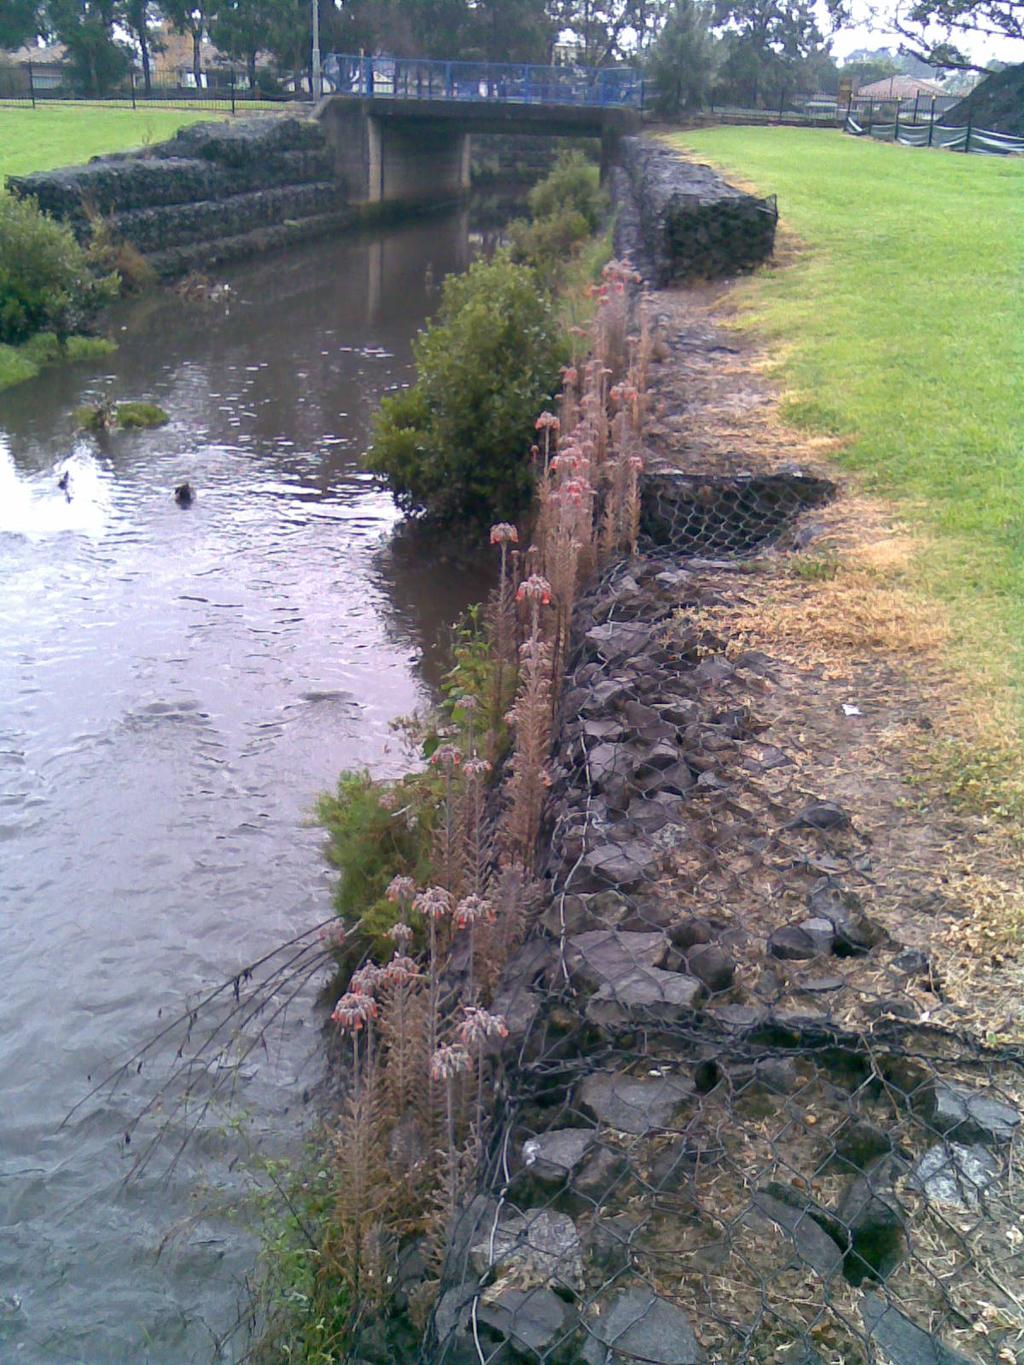 Gabions Gabions are loose rock structures to prevent soil erosion. Located along/across gullies or stream banks. They trap soil and reduce water velocities. They help maintain and control stream flow.